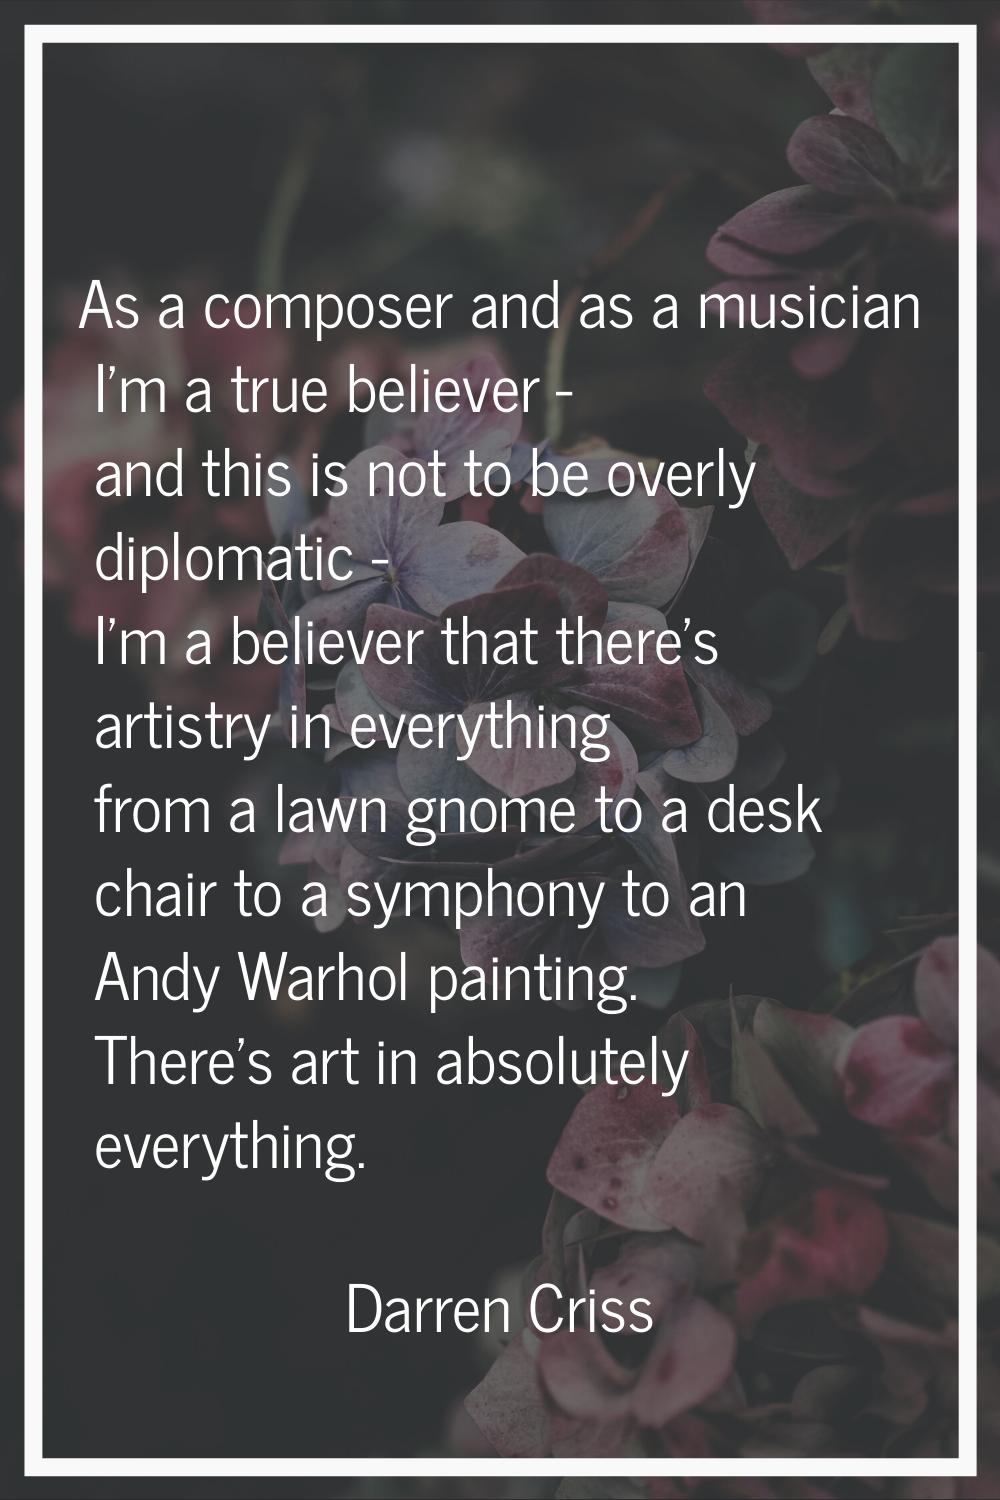 As a composer and as a musician I'm a true believer - and this is not to be overly diplomatic - I'm